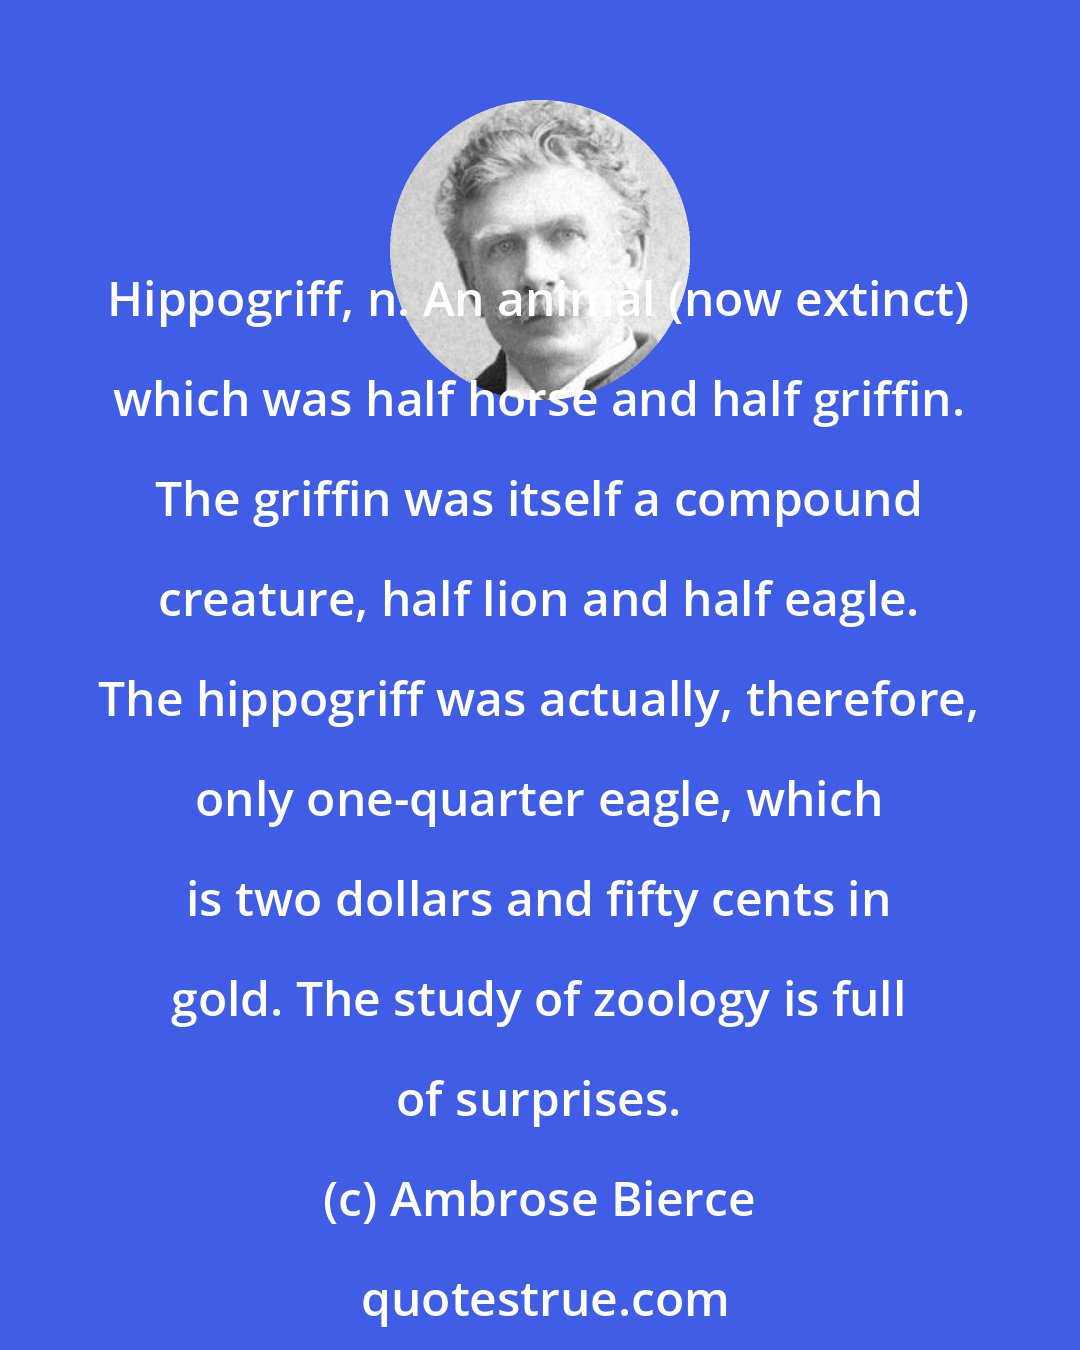 Ambrose Bierce: Hippogriff, n. An animal (now extinct) which was half horse and half griffin. The griffin was itself a compound creature, half lion and half eagle. The hippogriff was actually, therefore, only one-quarter eagle, which is two dollars and fifty cents in gold. The study of zoology is full of surprises.